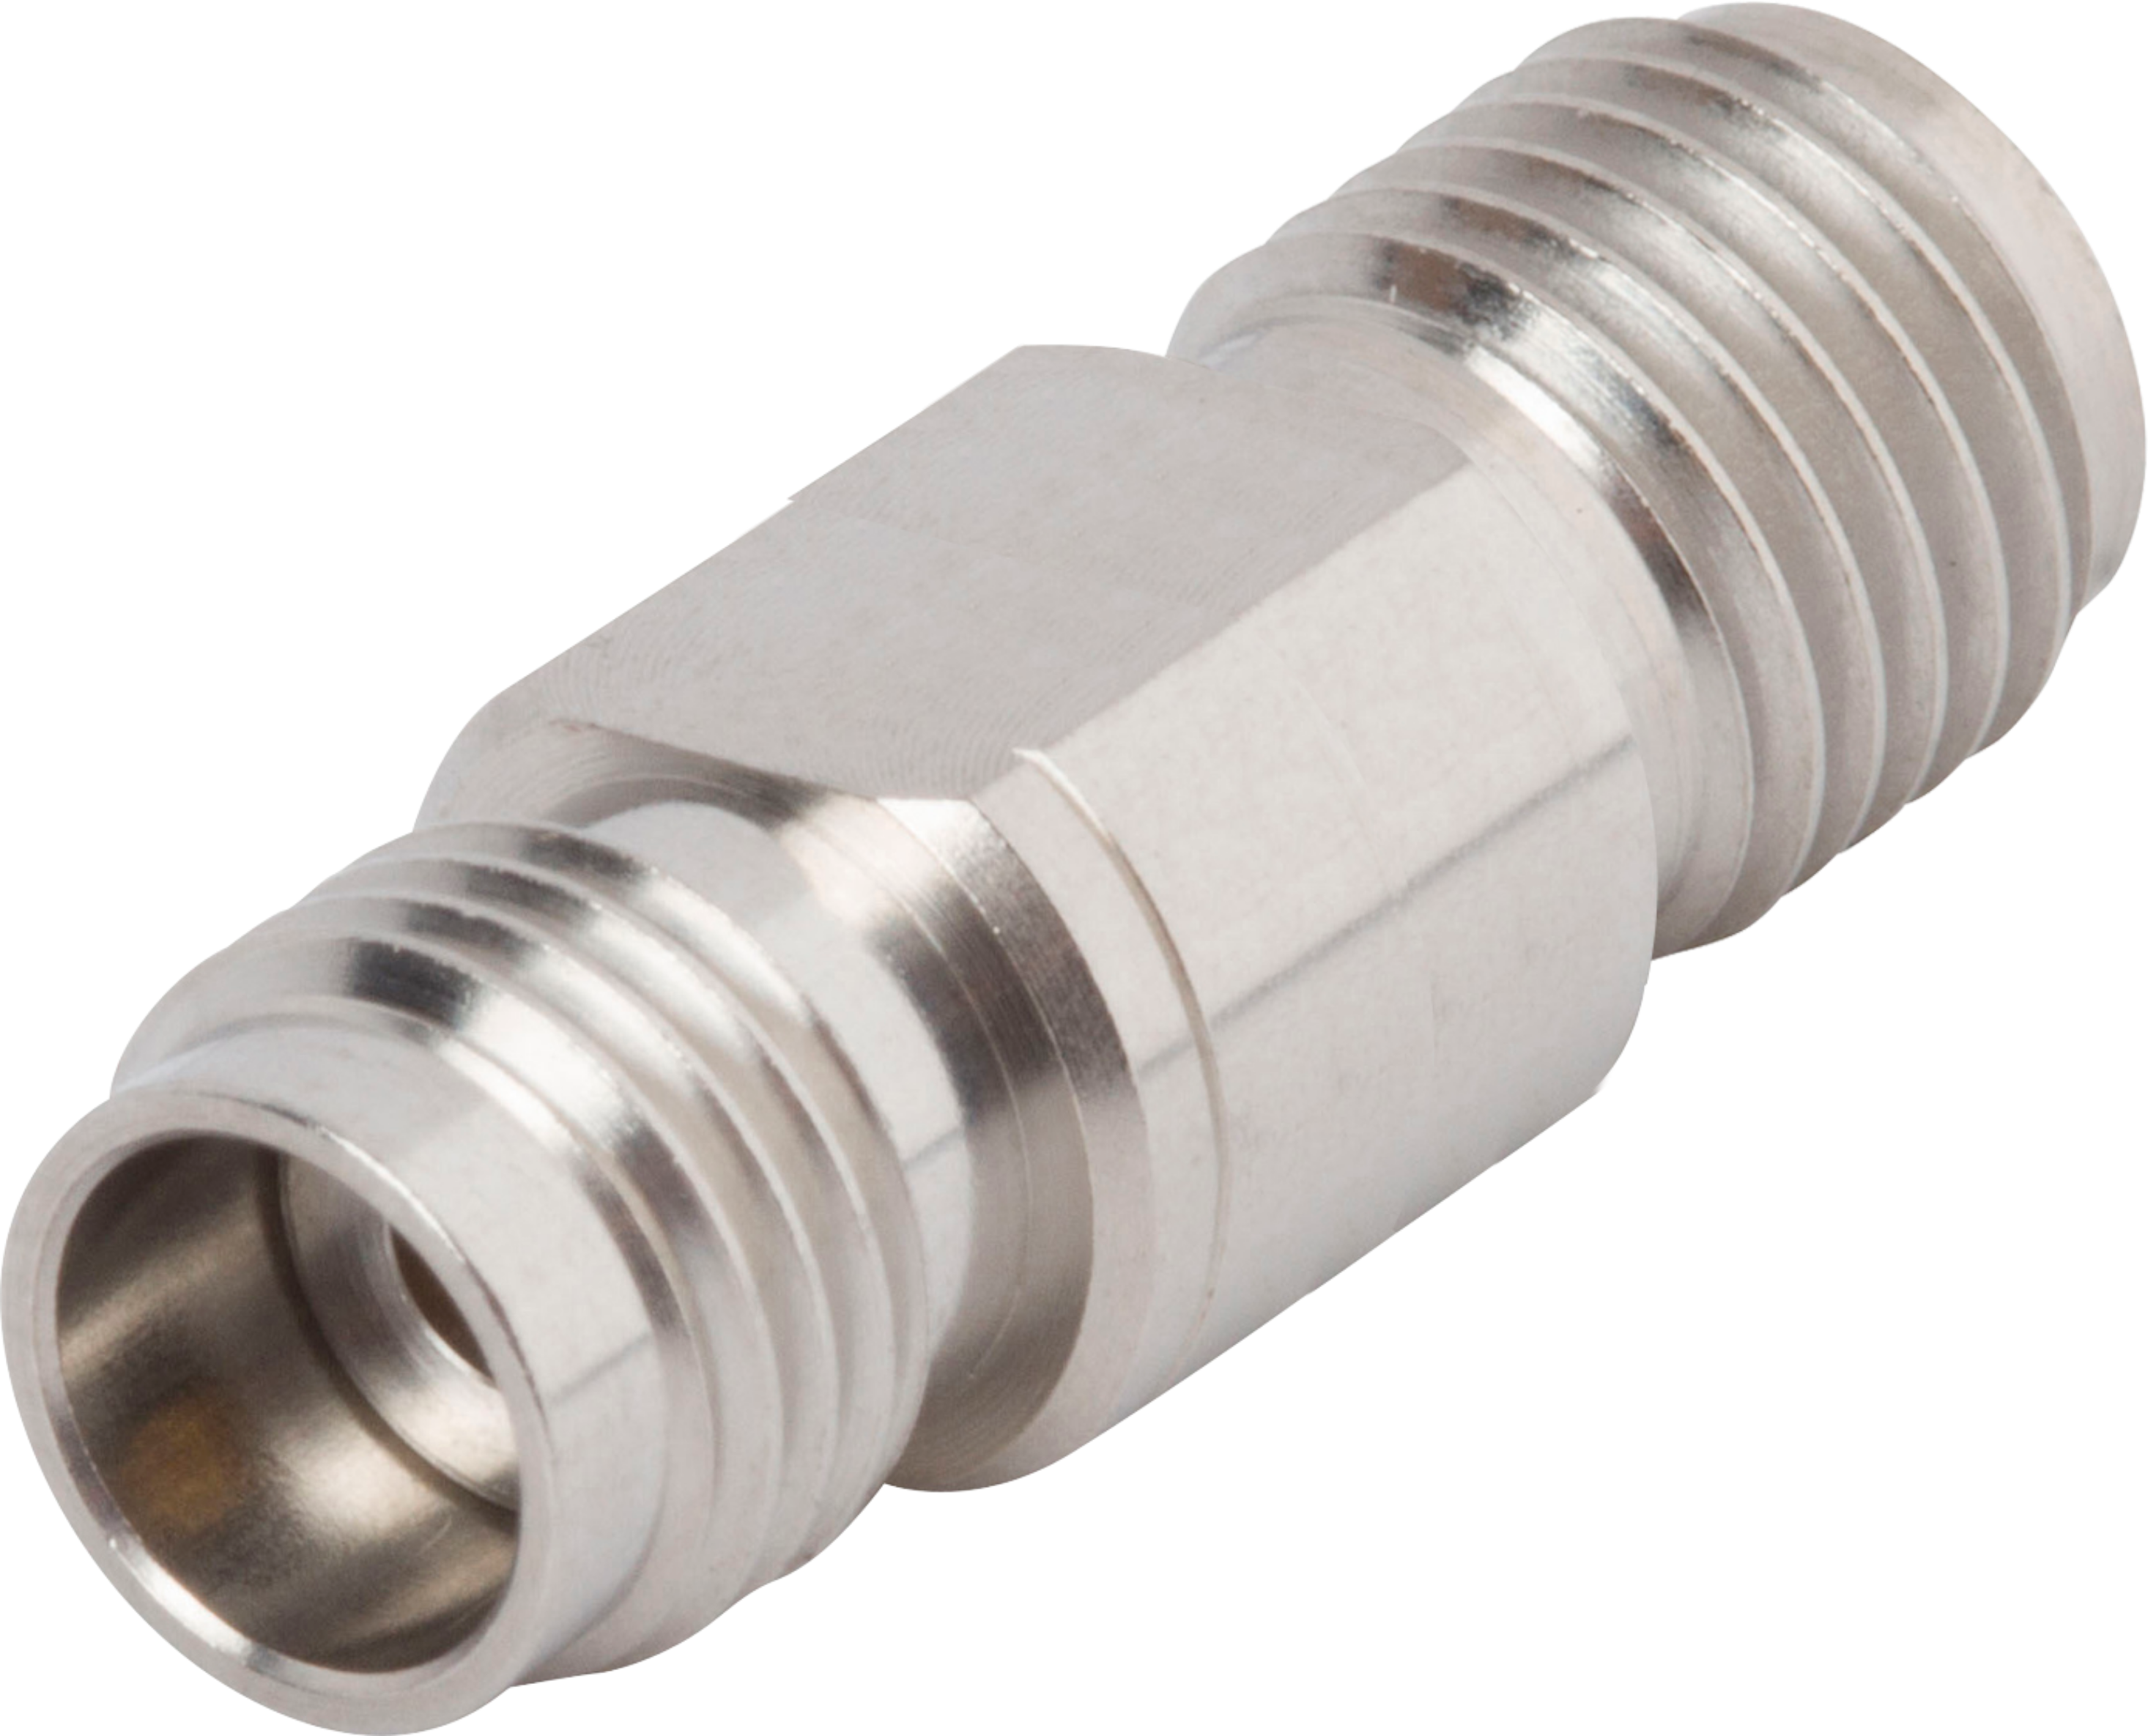 Picture of 2.4mm Female to 2.92mm Female Adapter